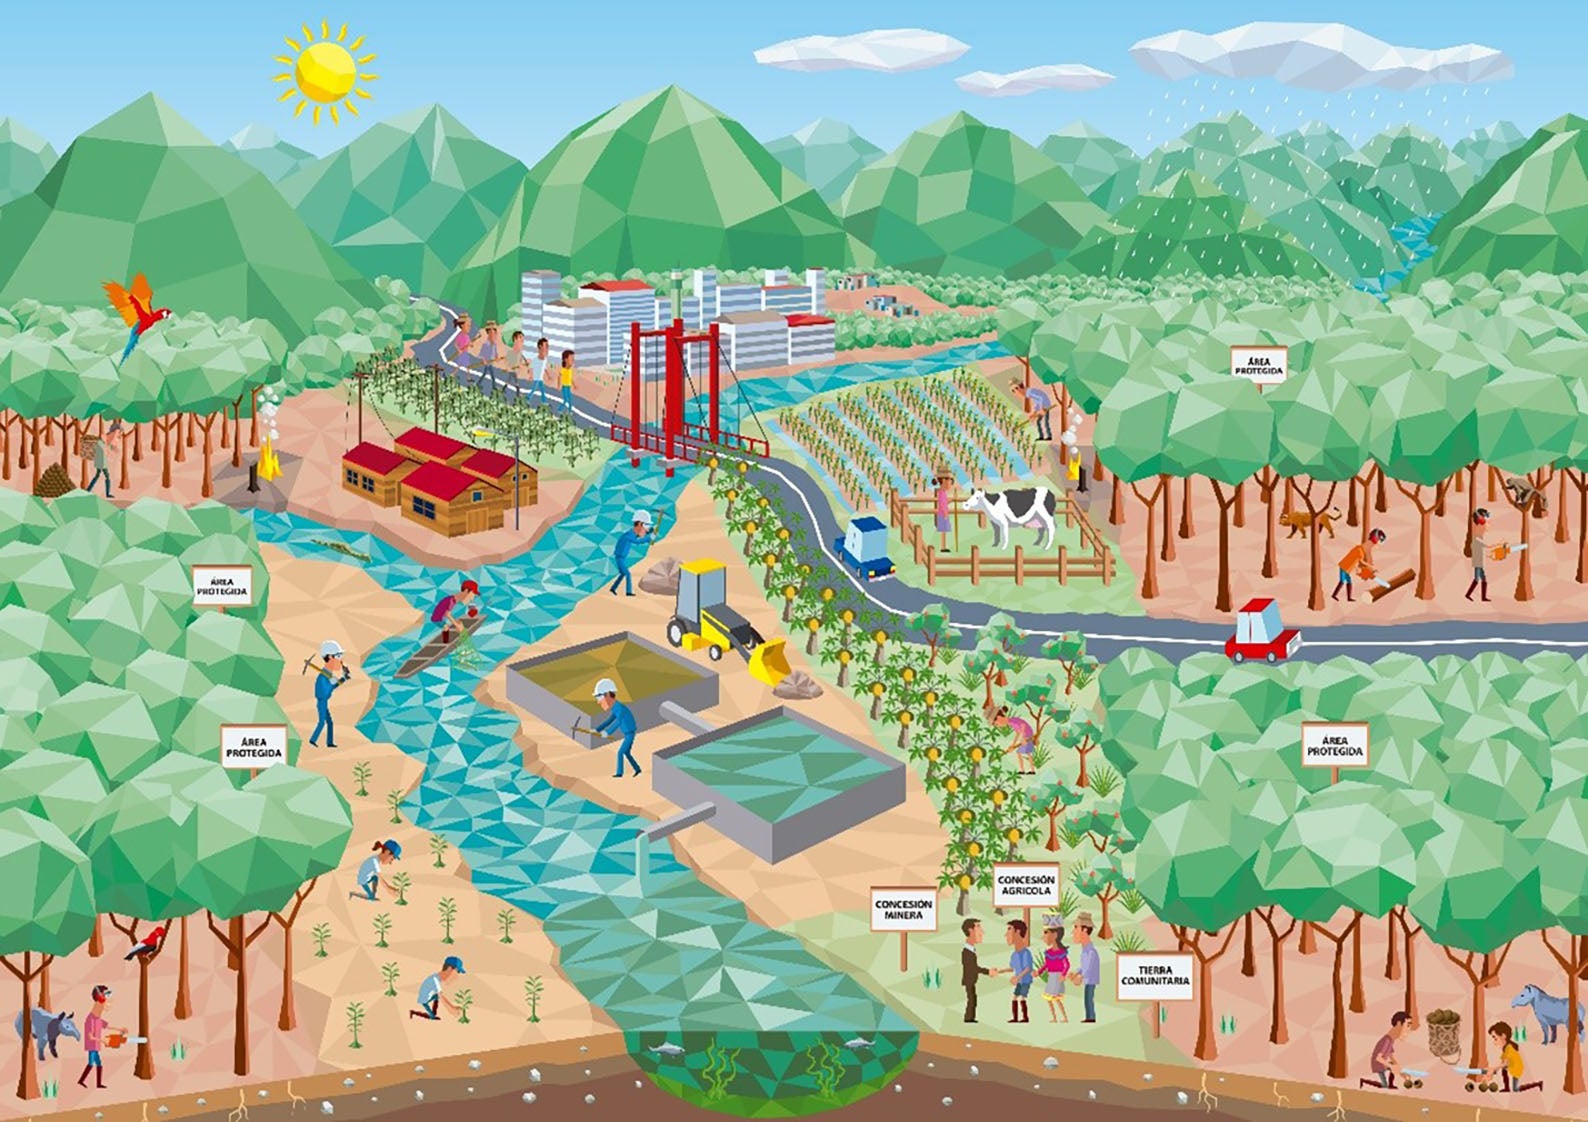 An illustration of a river, forest, mountains, farms and communities in Madre de Dios Peru